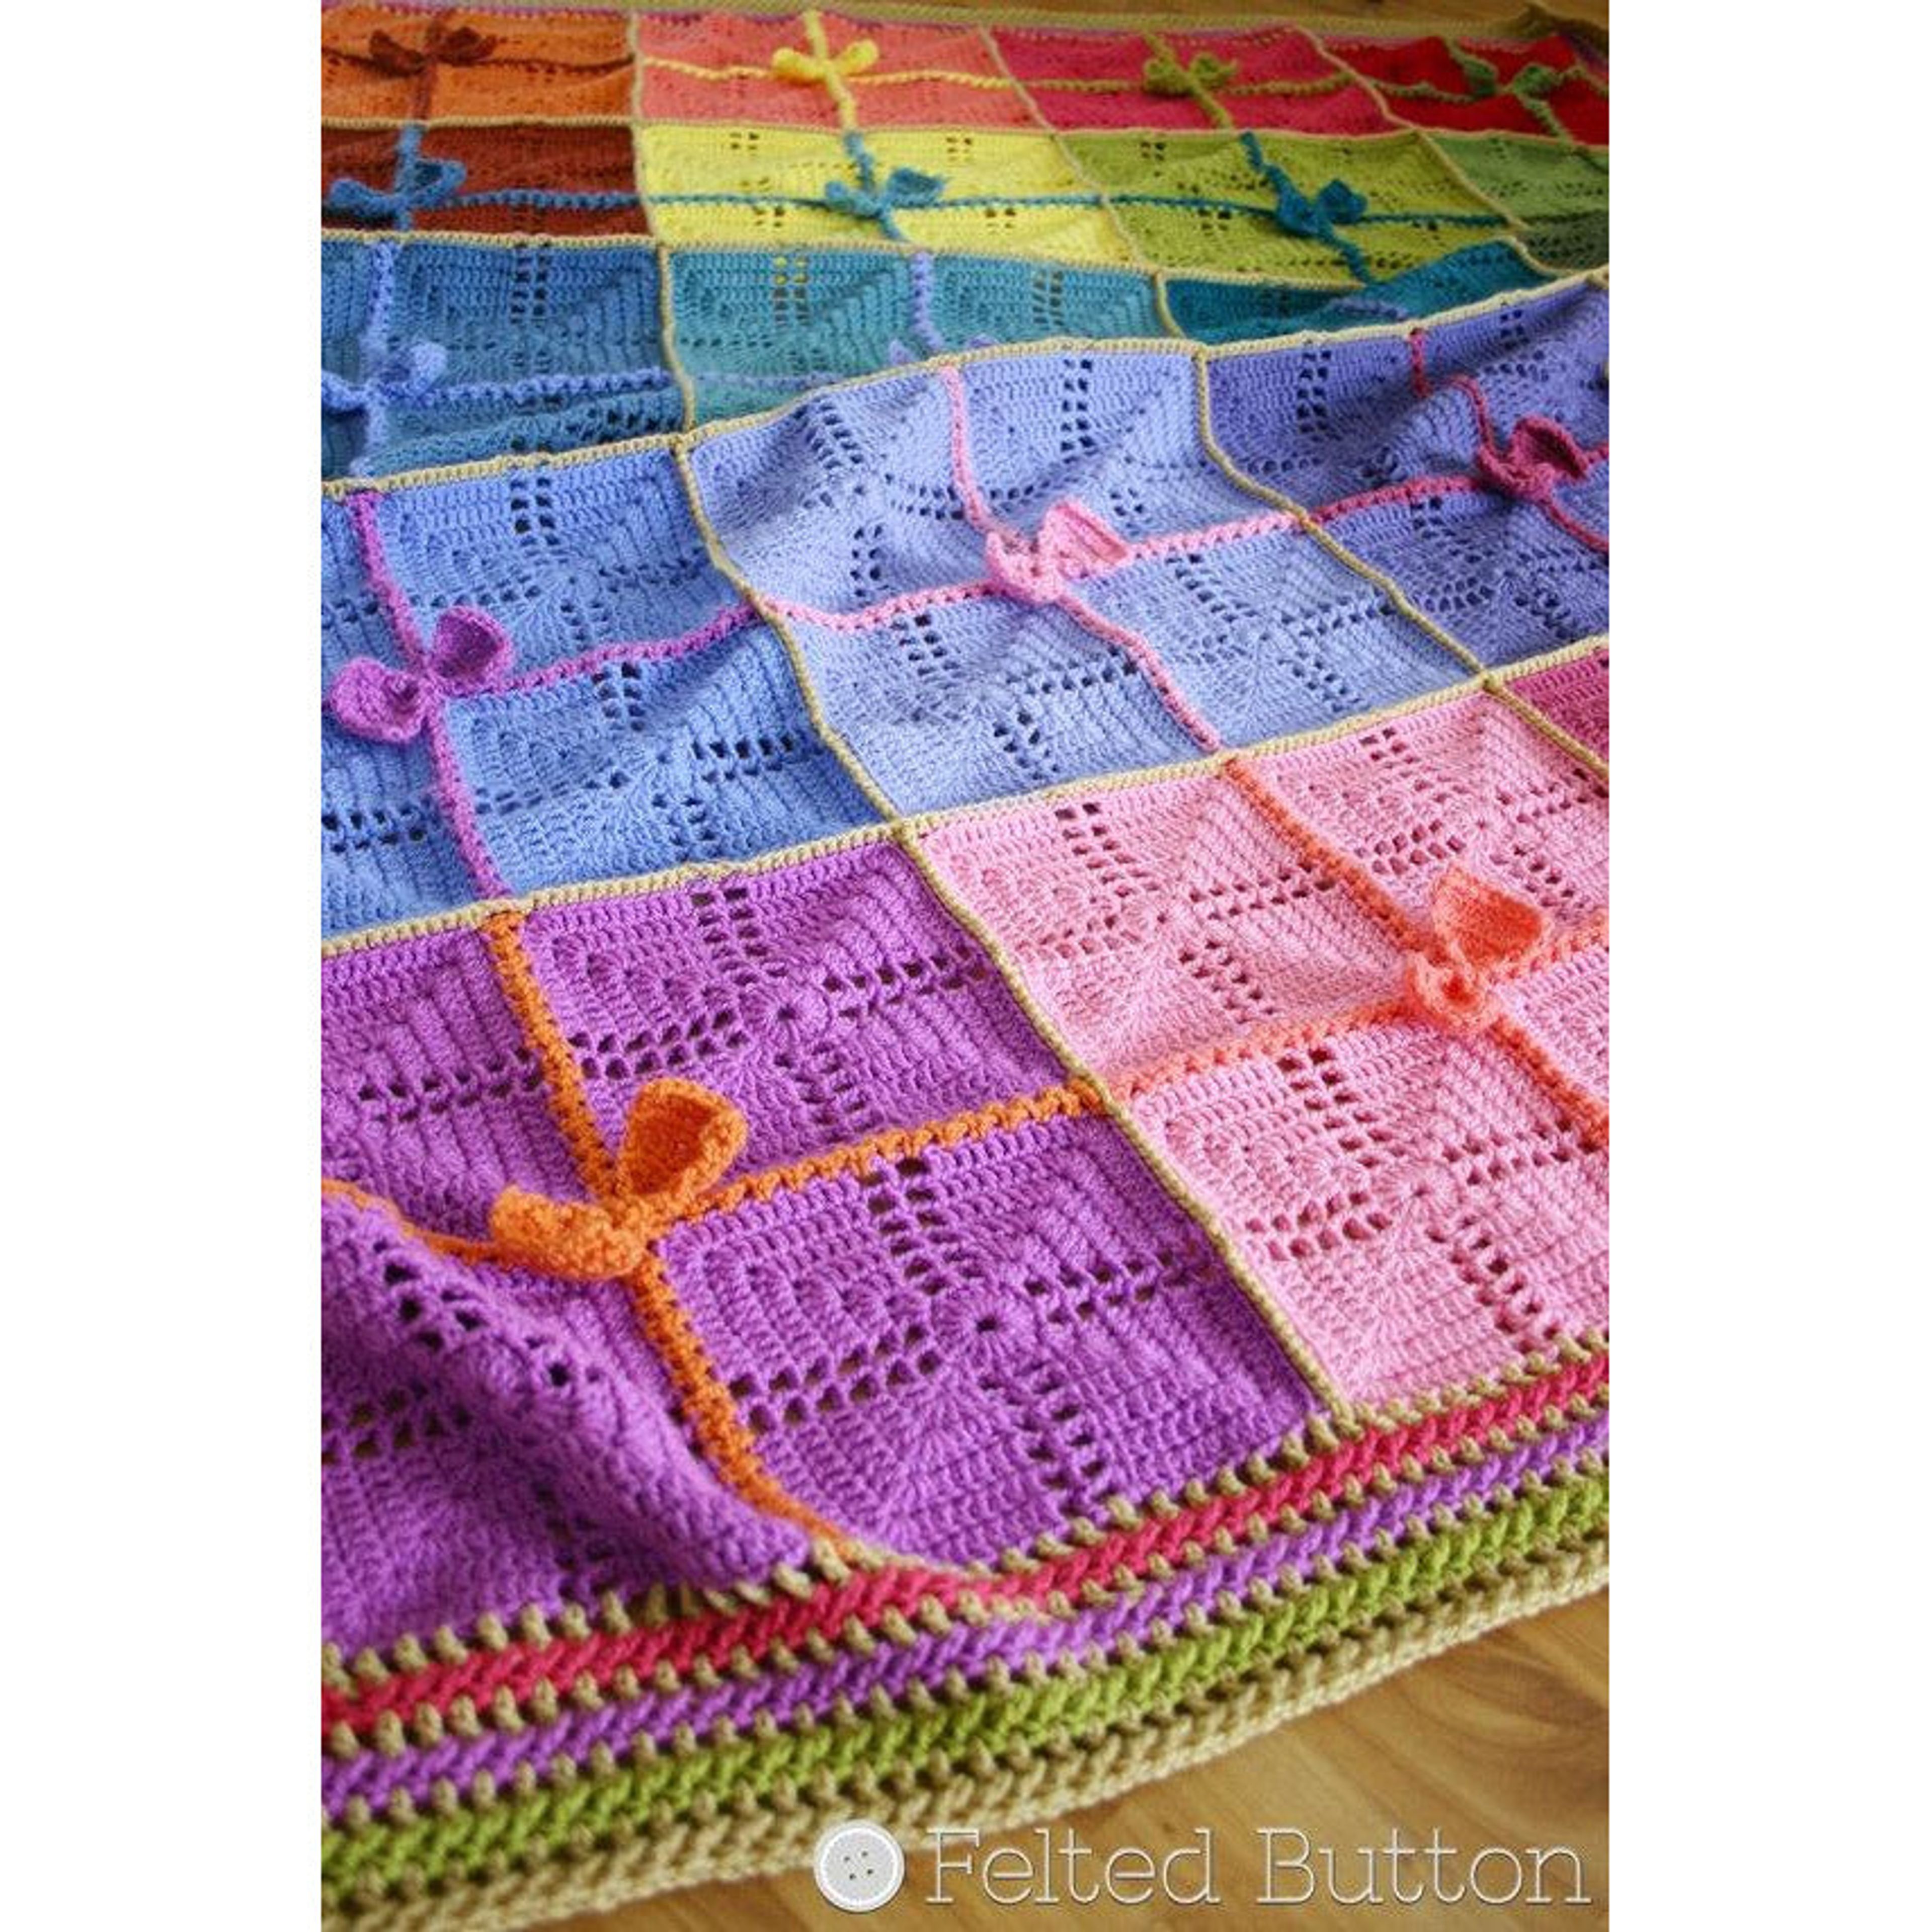 Gifted Blanket | Crochet Pattern | Felted Button